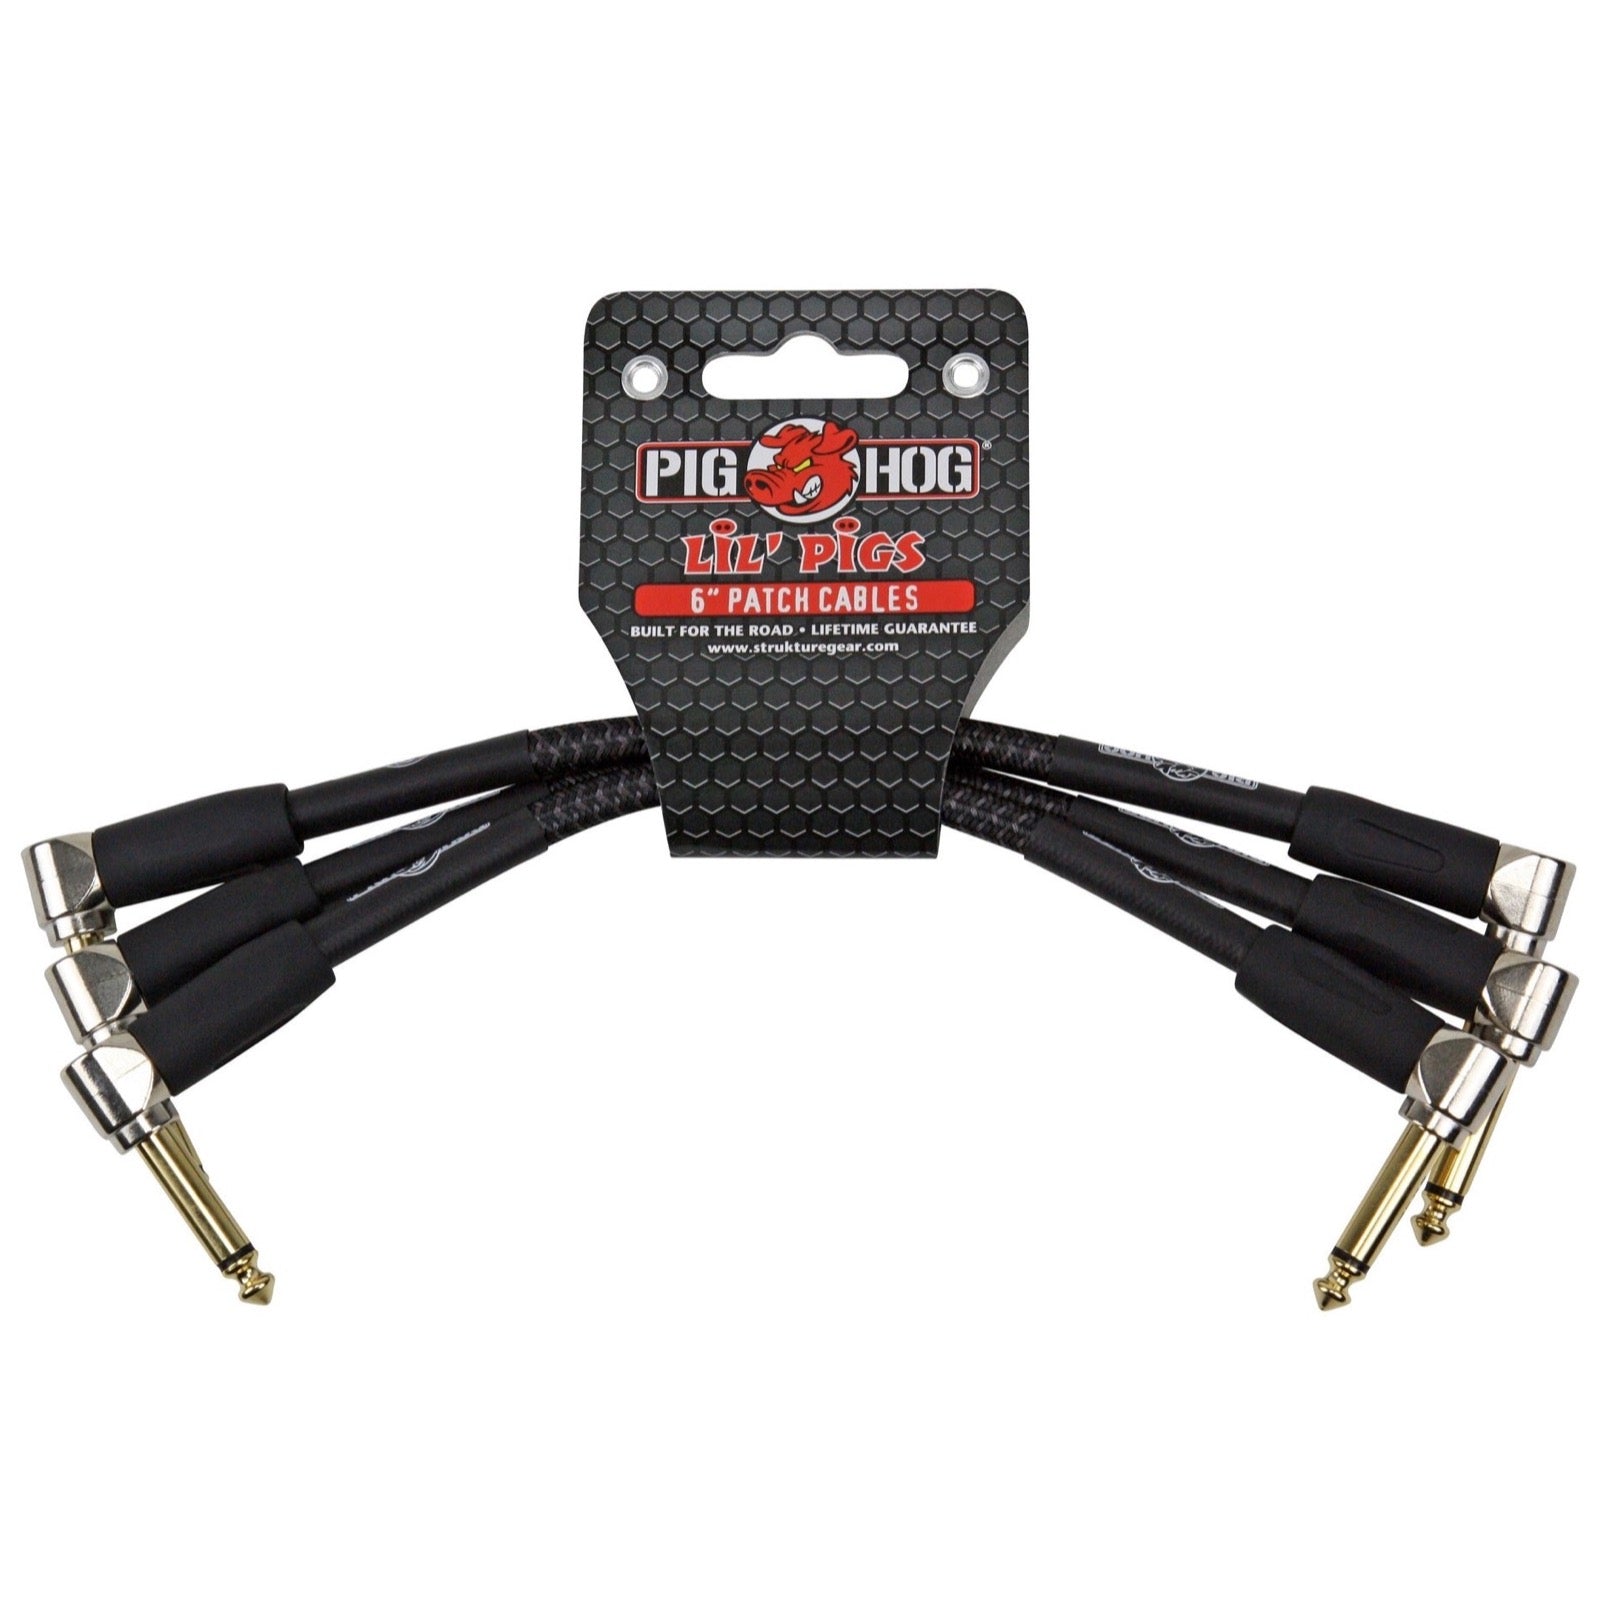 Pig Hog Lil Pigs Pedal Patch Cables, Black Woven, 6 Inch